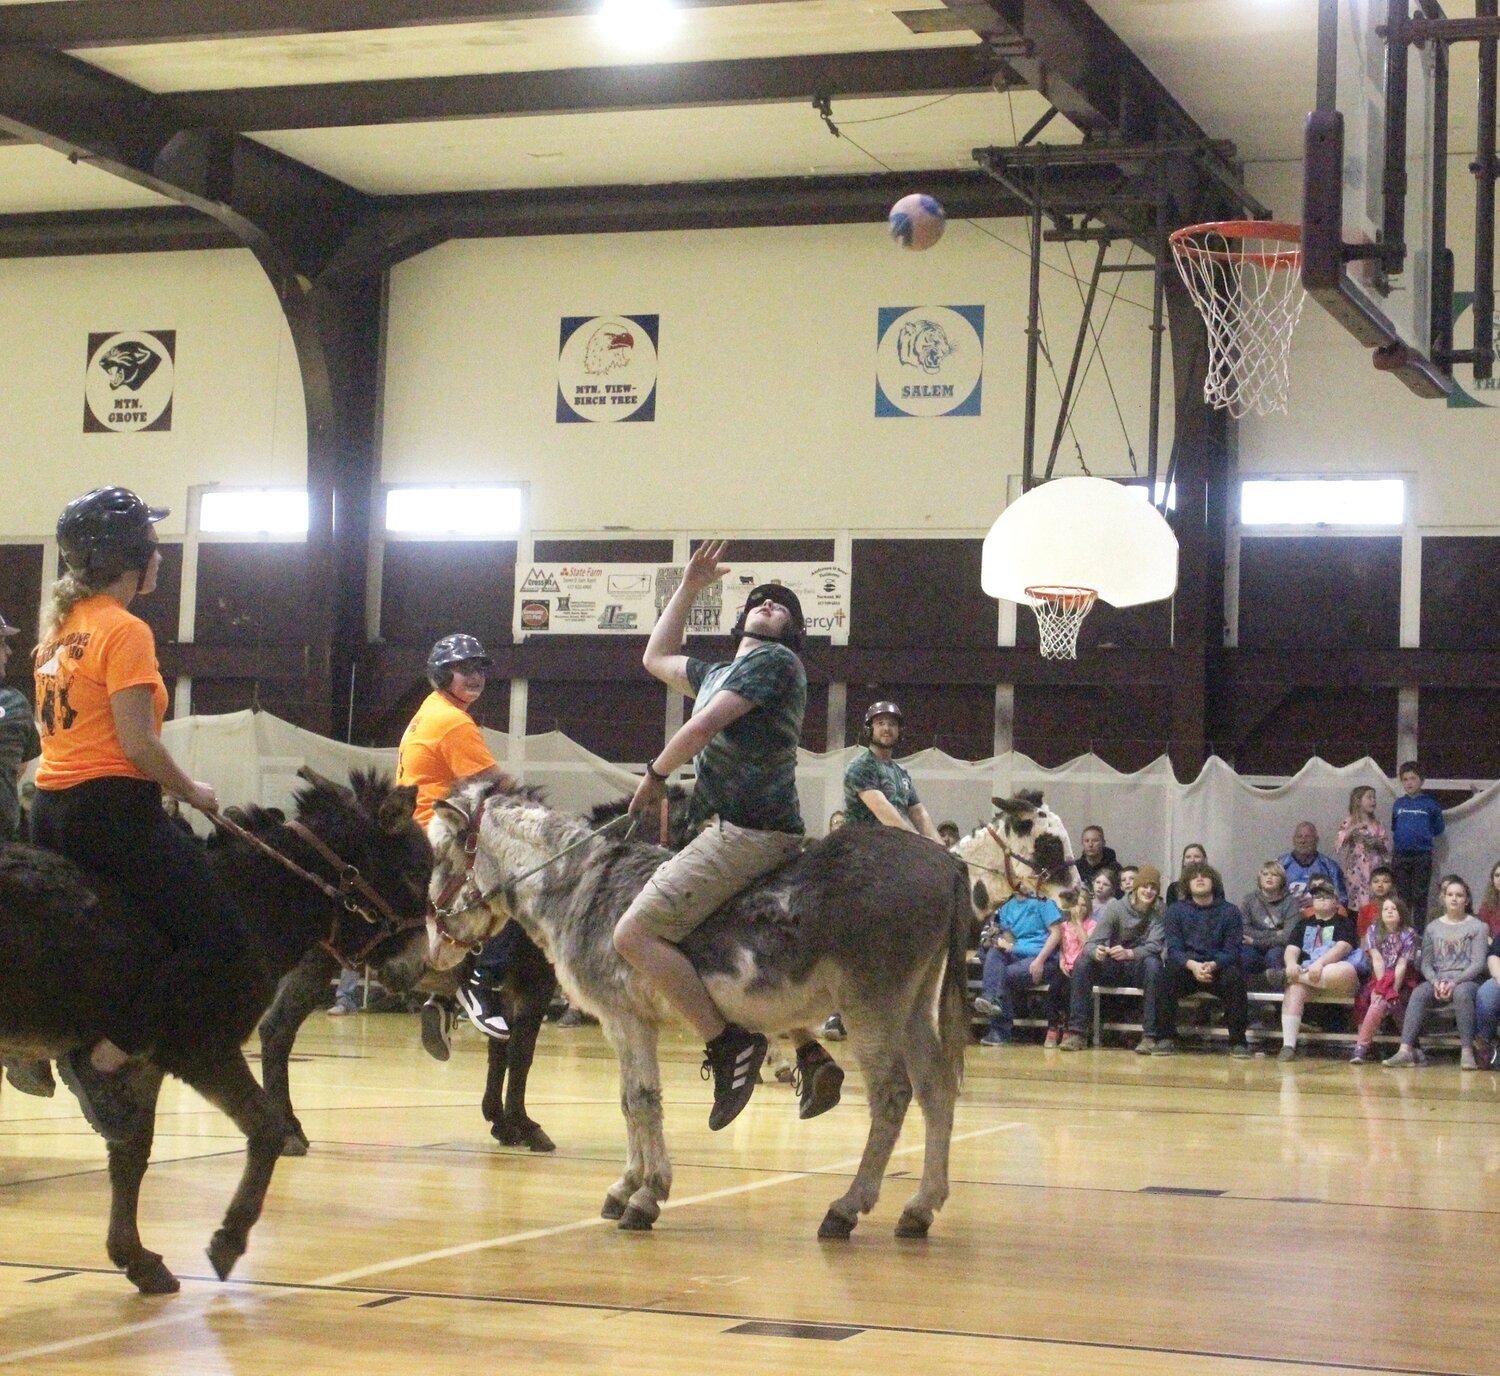 A donkey basketball player launches a hook shot over their shoulder during a contest.